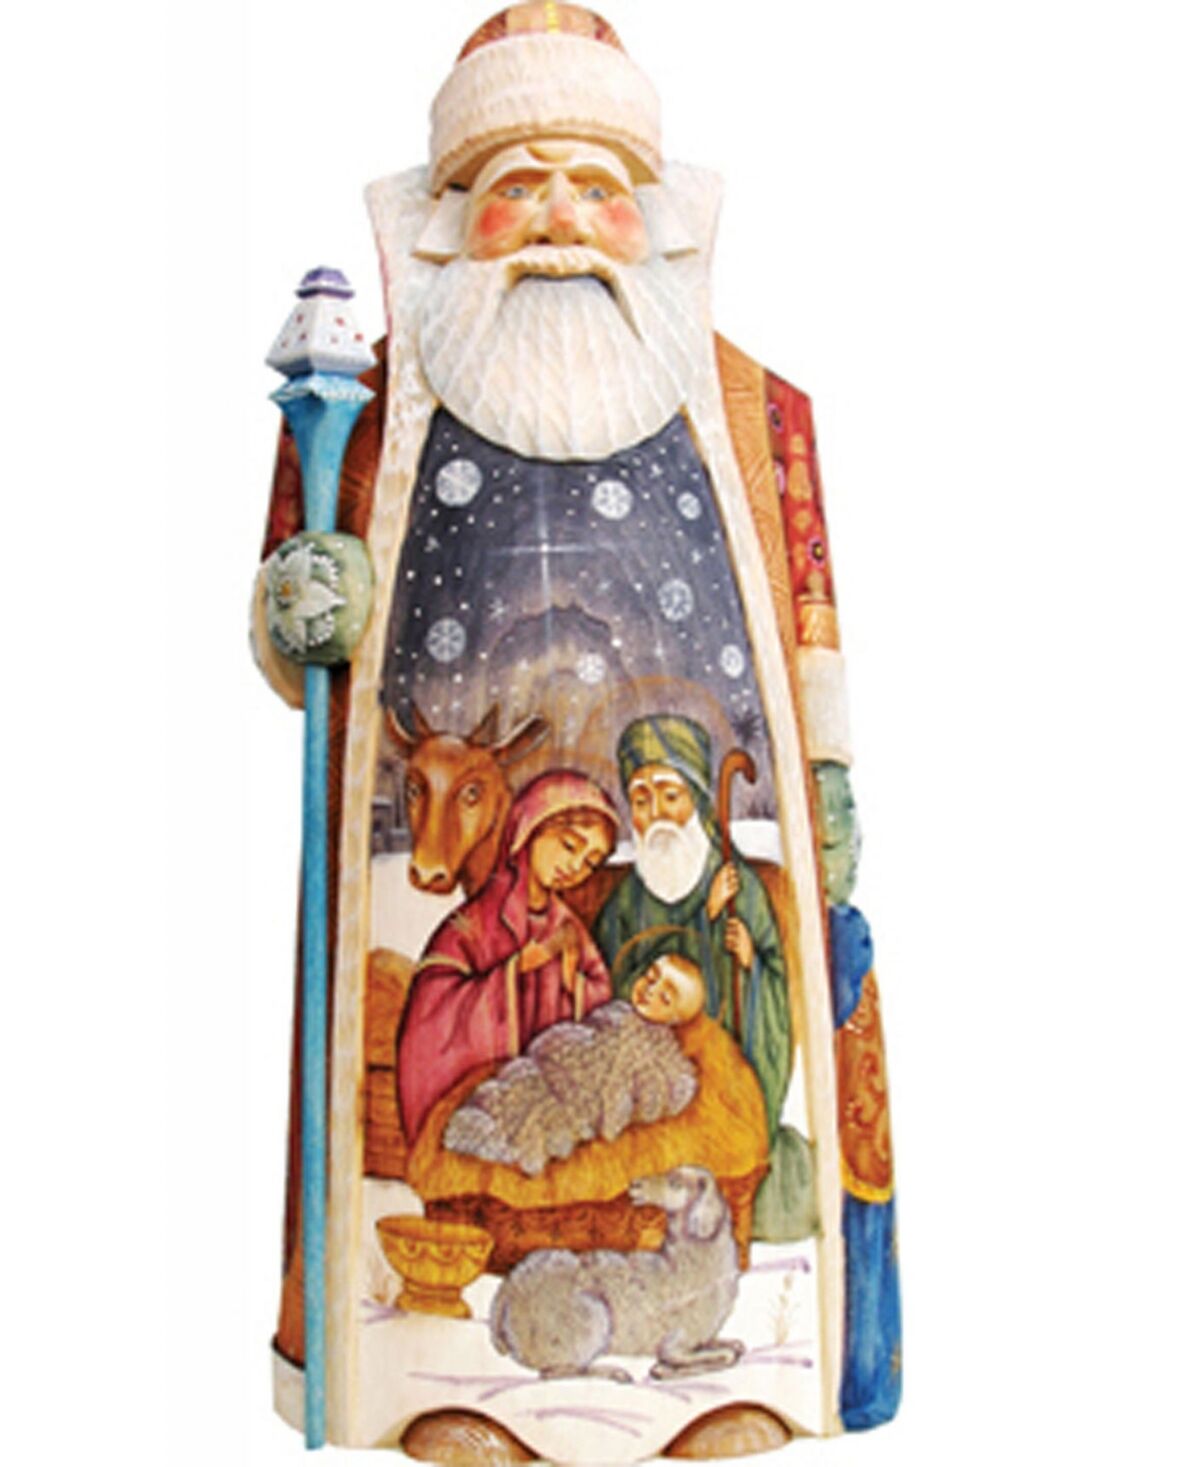 G.DeBrekht Woodcarved and Hand Painted Nativity Merchant Santa Claus Figurine - Multi